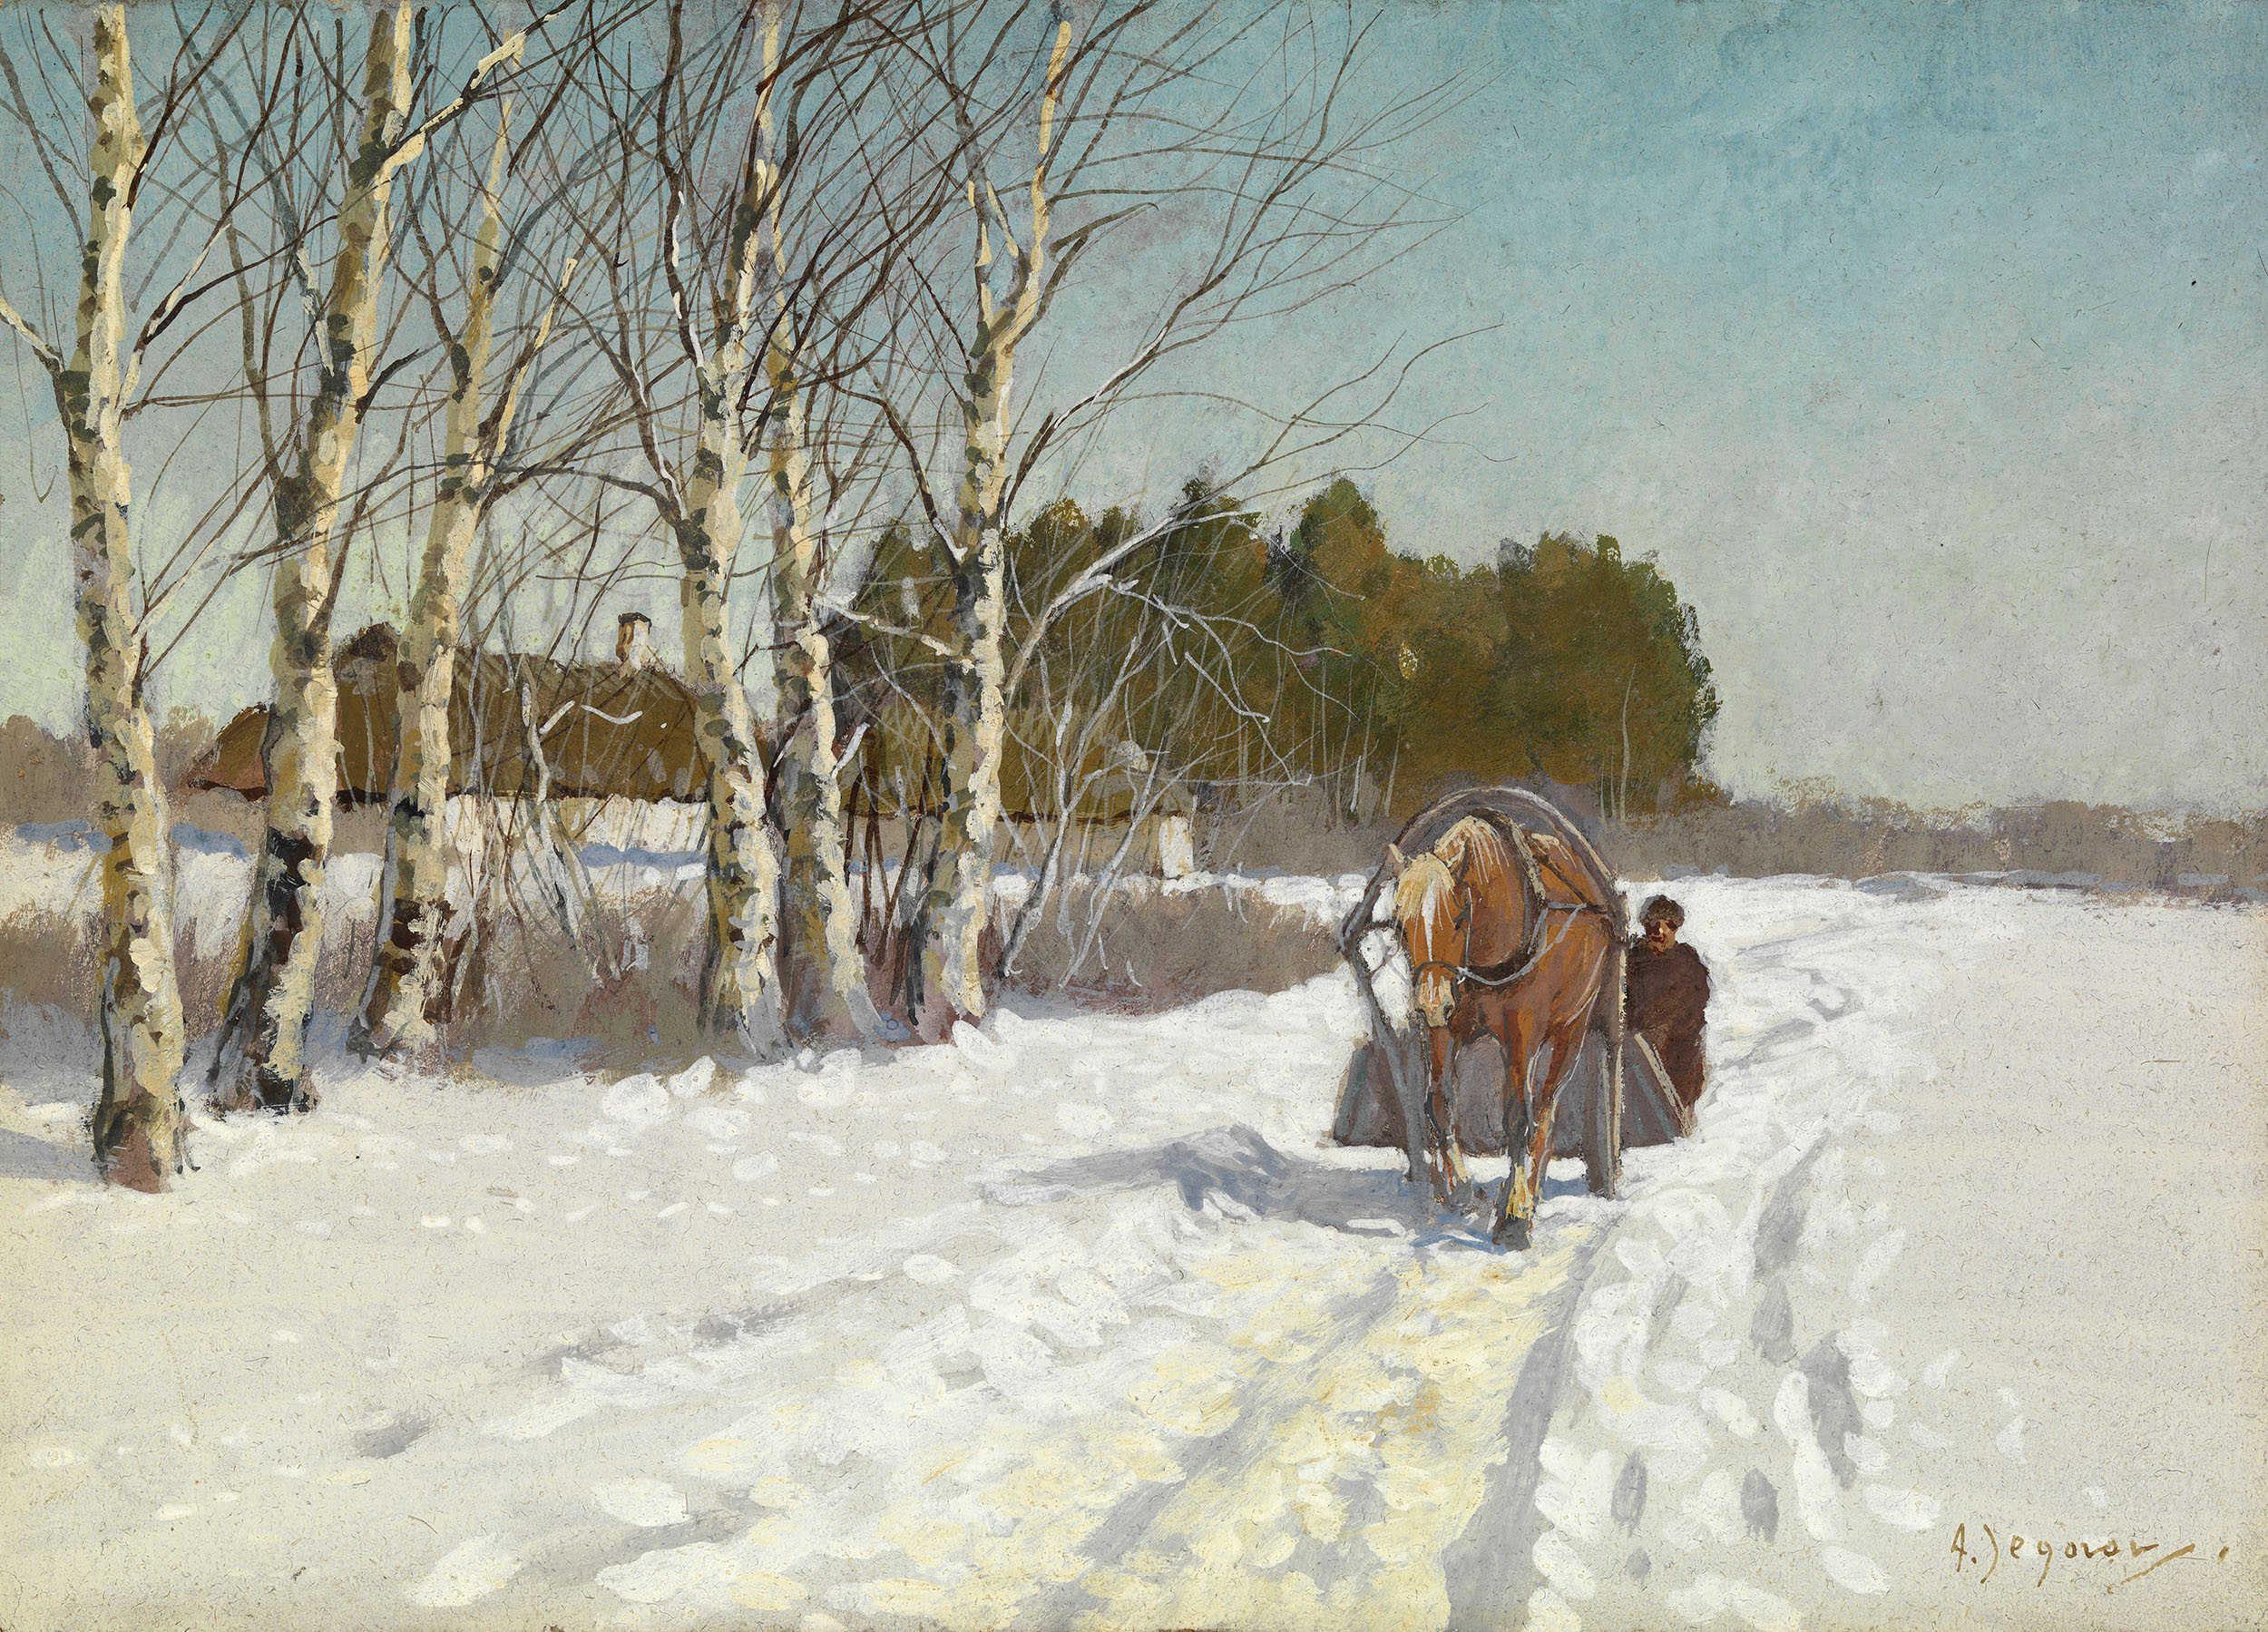 EGOROV, ANDREI Horse and Sleigh in a Snow-covered Field